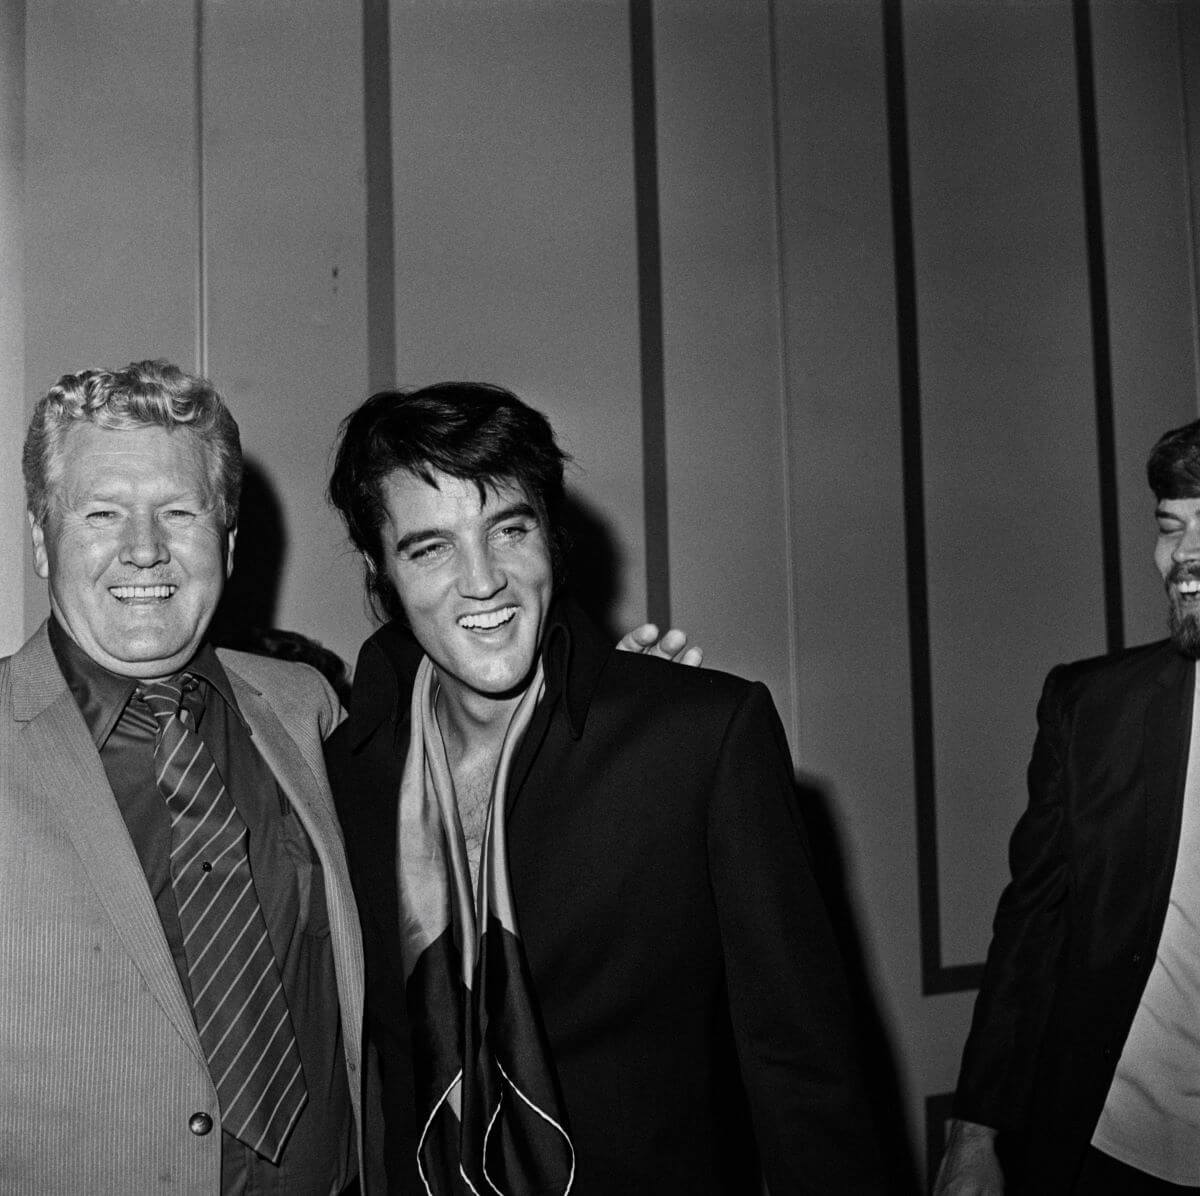 A black and white picture of Vernon Presley standing with his arm around Elvis' shoulders. They both smile.